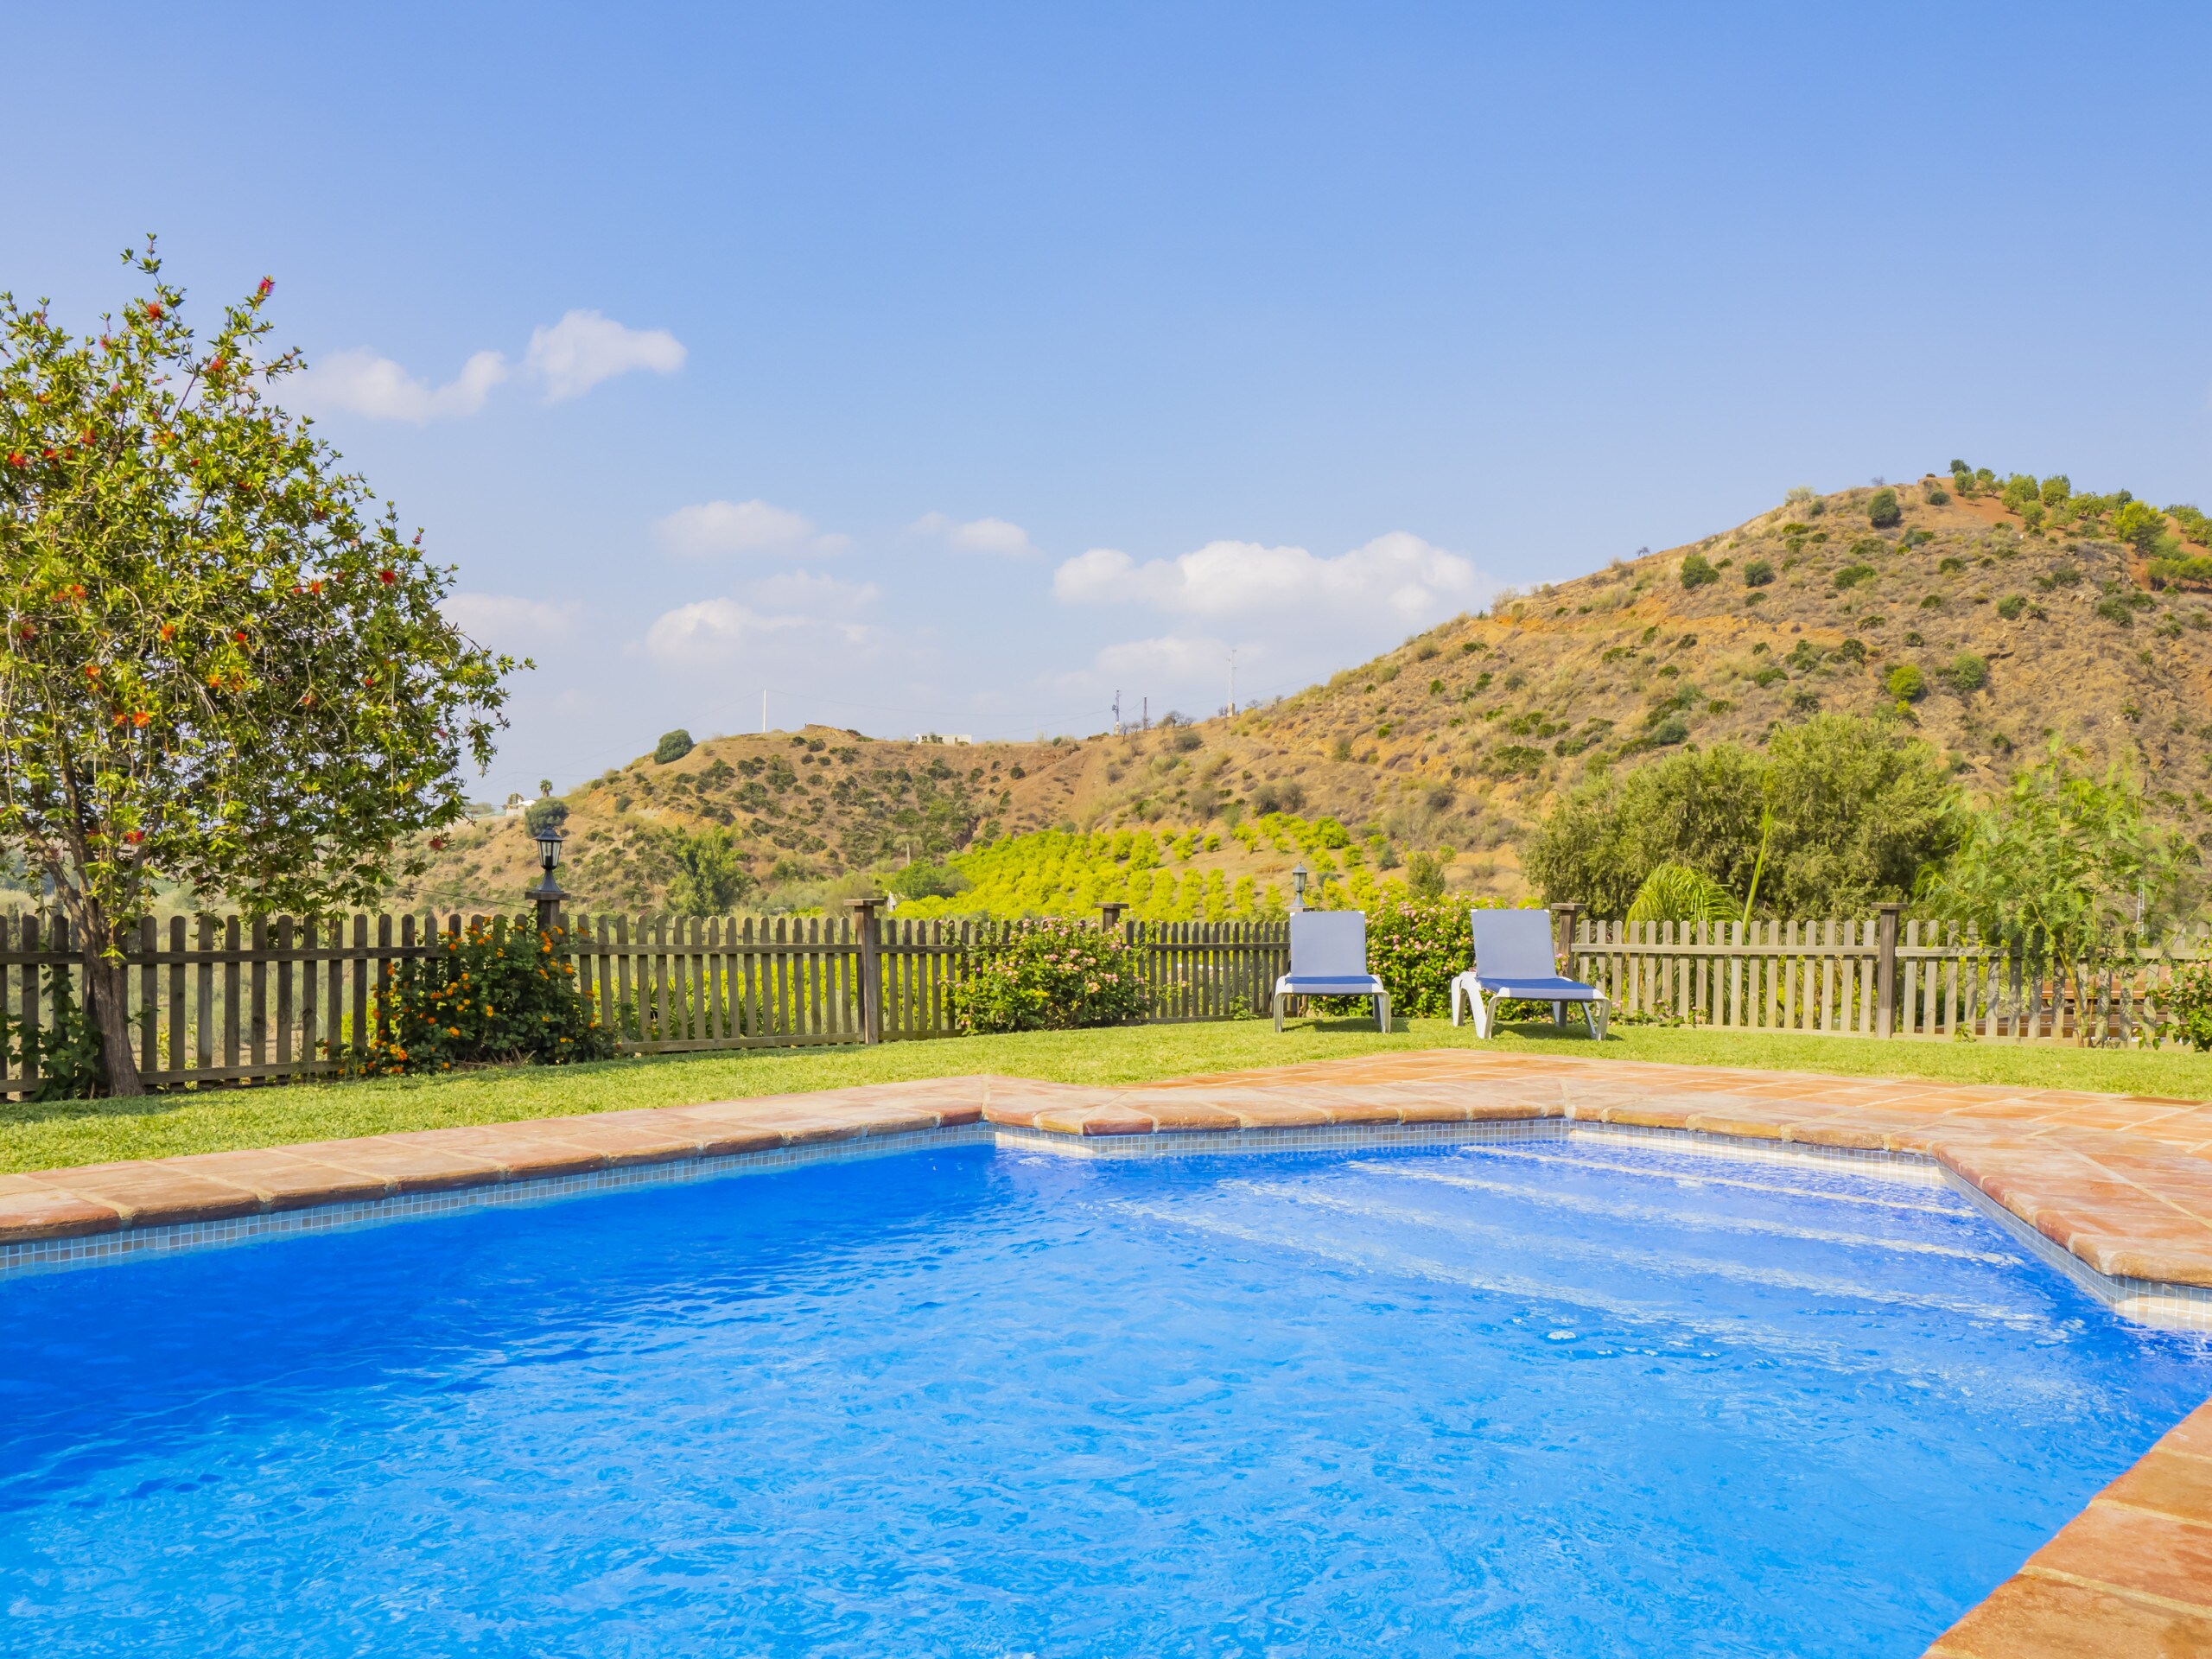 Enjoy the pool of this rural house in Pizarra